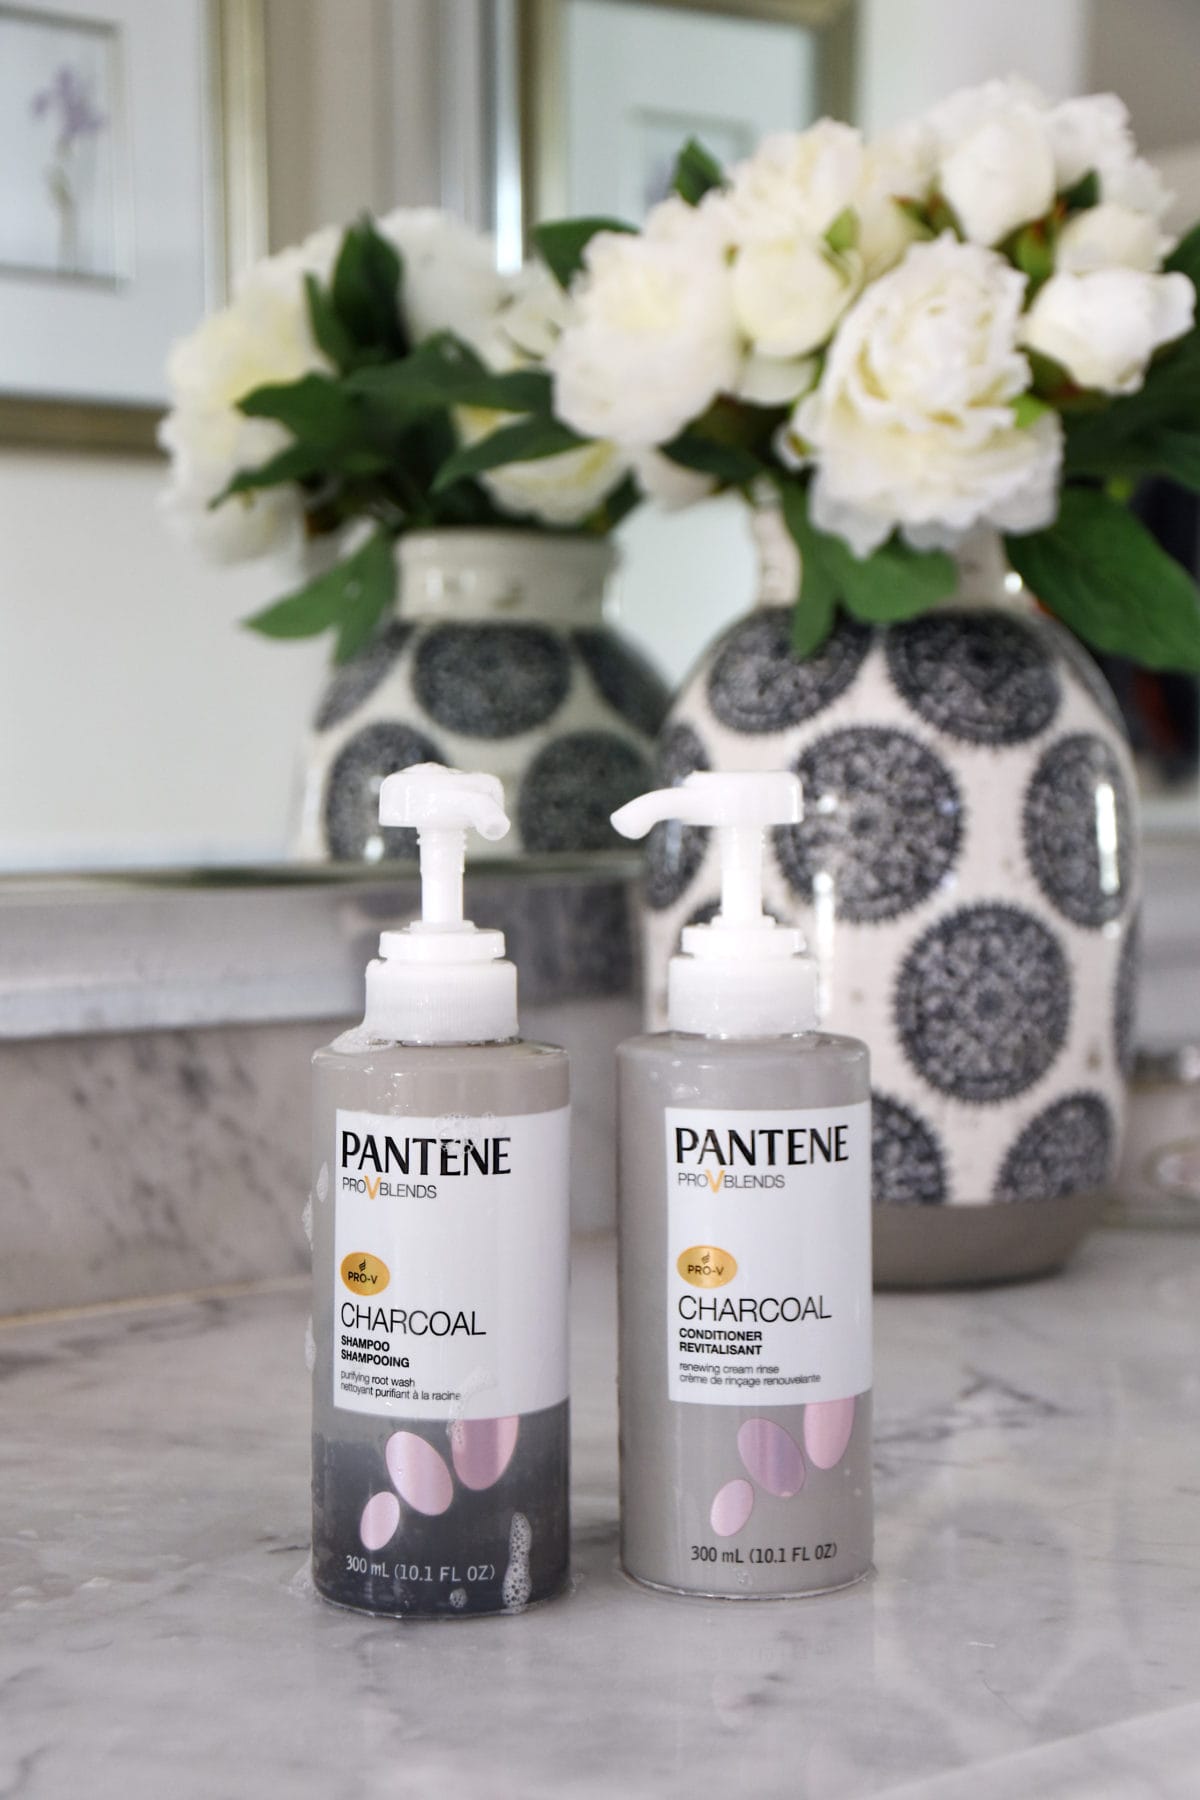 Pantene Charcoal shampoo and conditioner